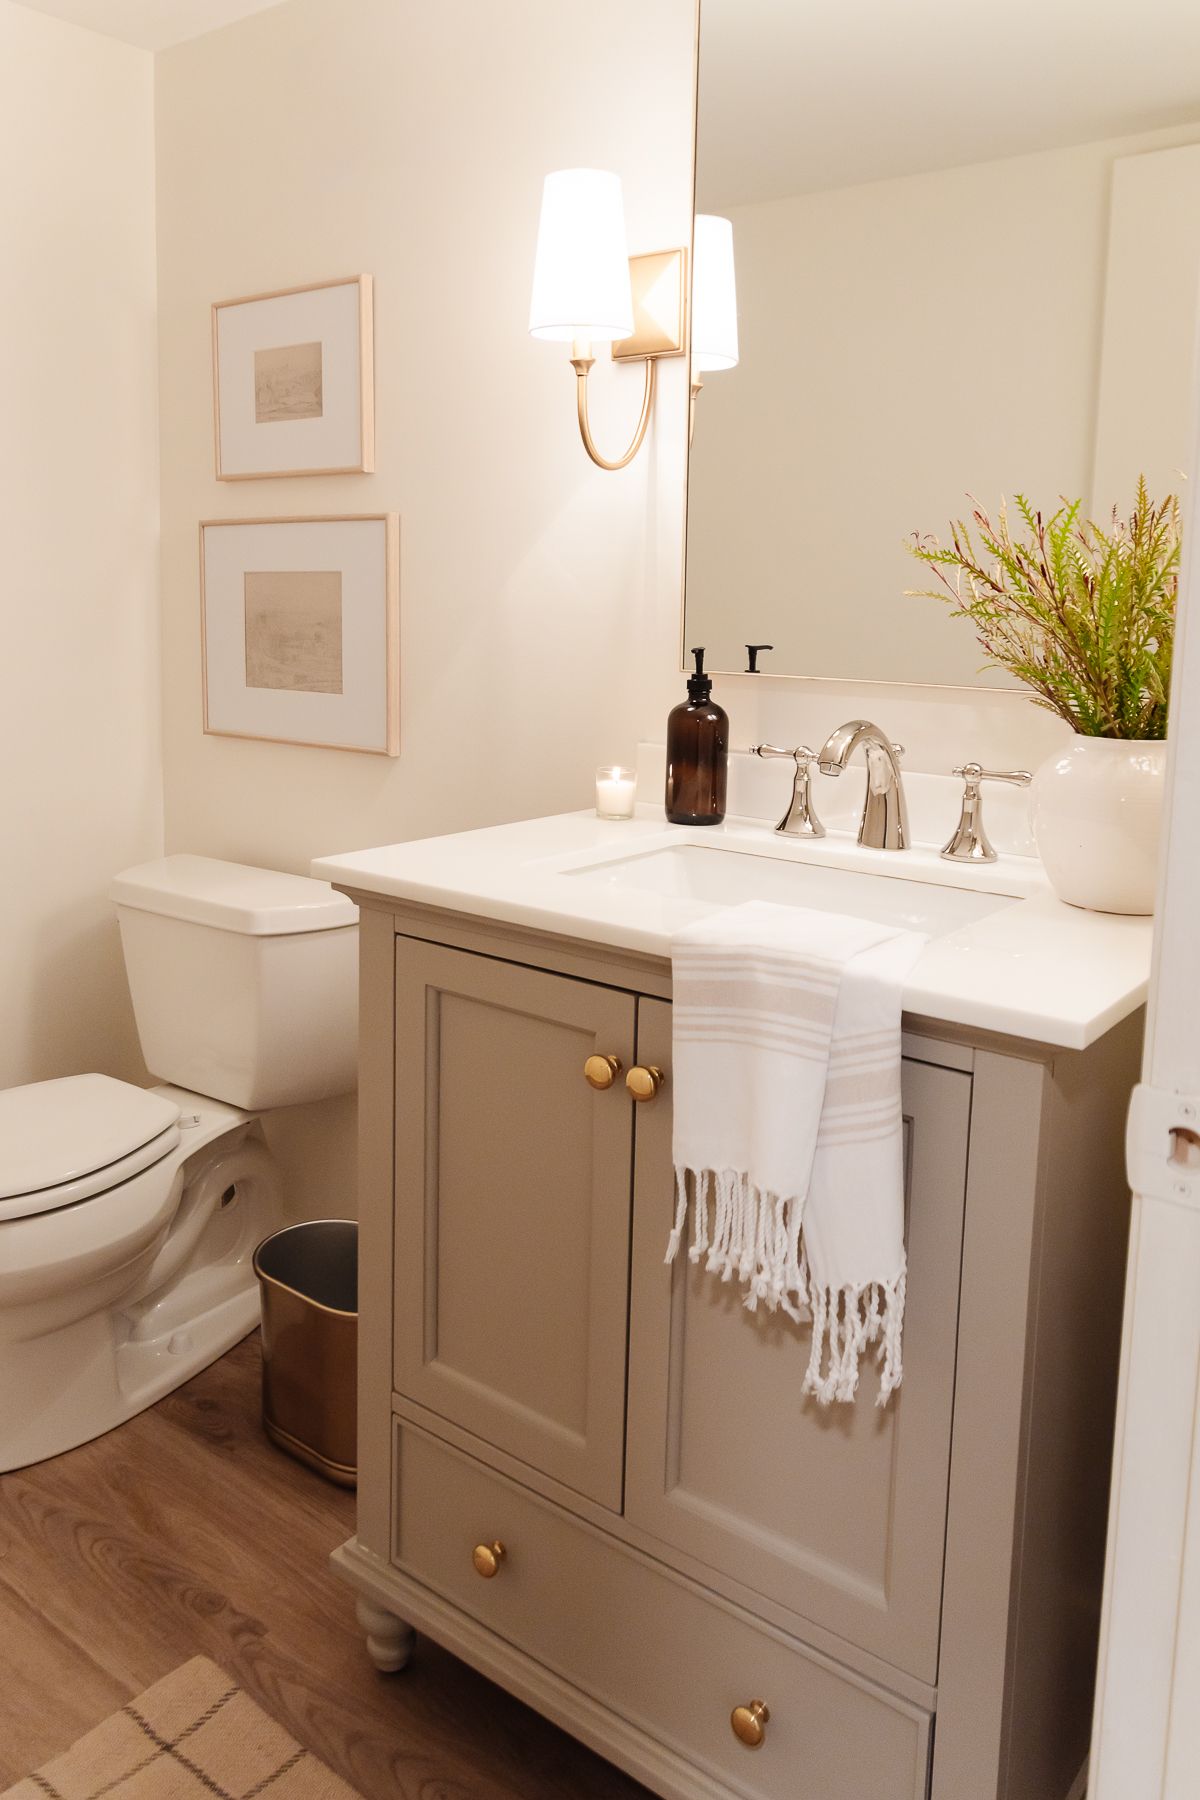 A bathroom in basement with gold sconces and a gray vanity